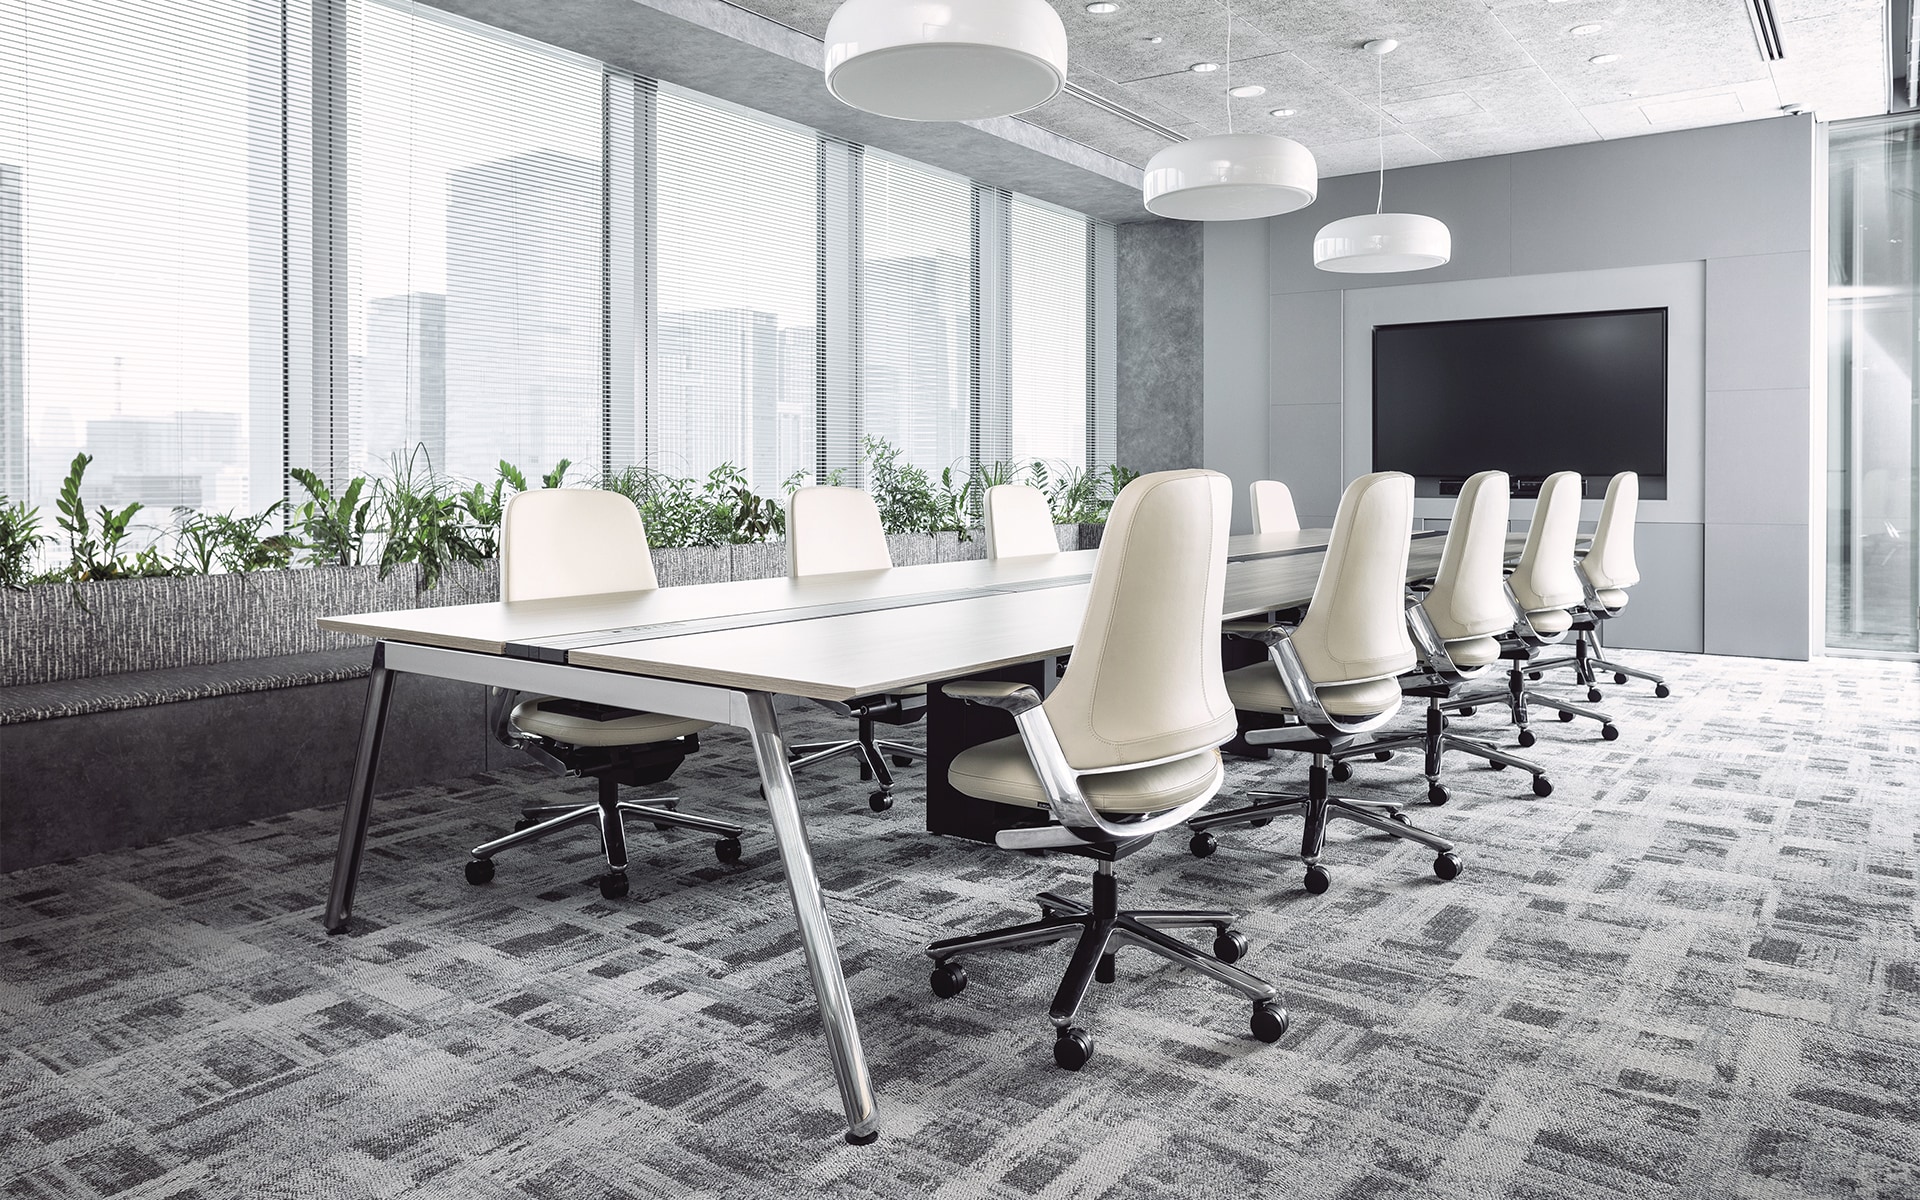 Nine white ITOKI Leonis executive chairs by ITO Design in modern conference room